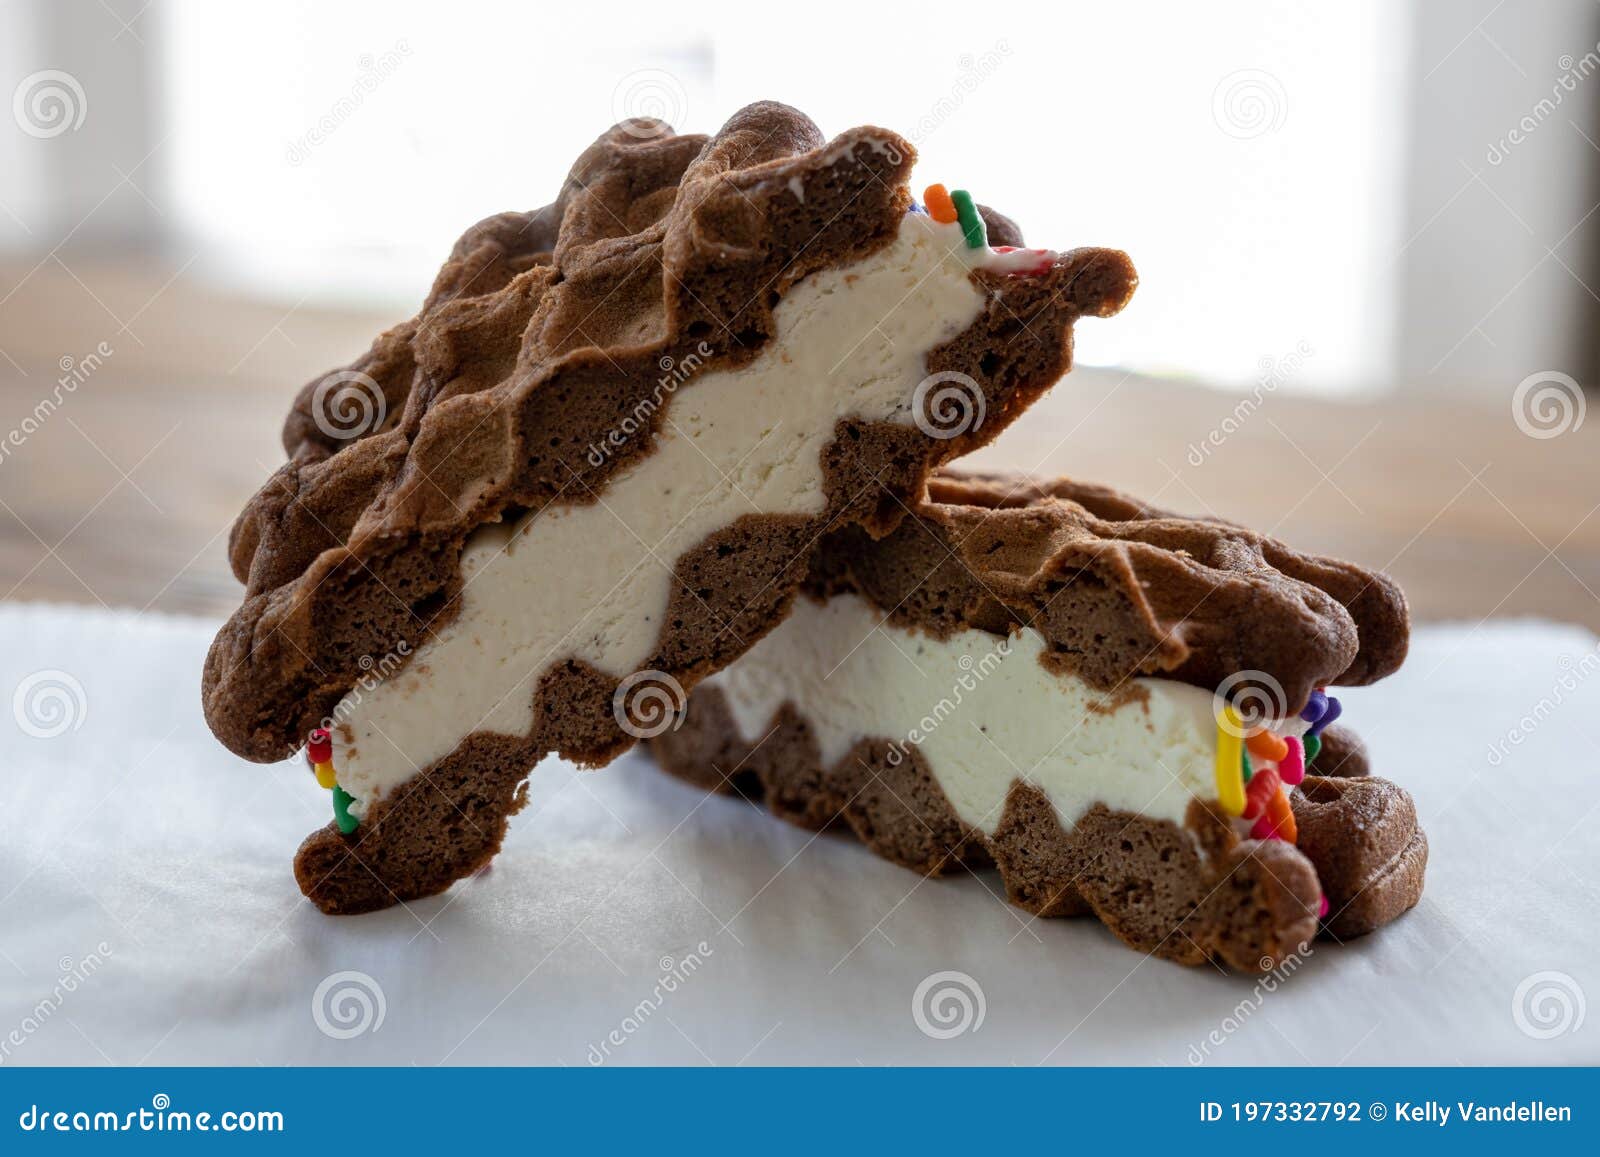 Cut In Half Ice Cream Sandwich With Sprinkles Stacked Stock Photo Image Of Copy Tasty